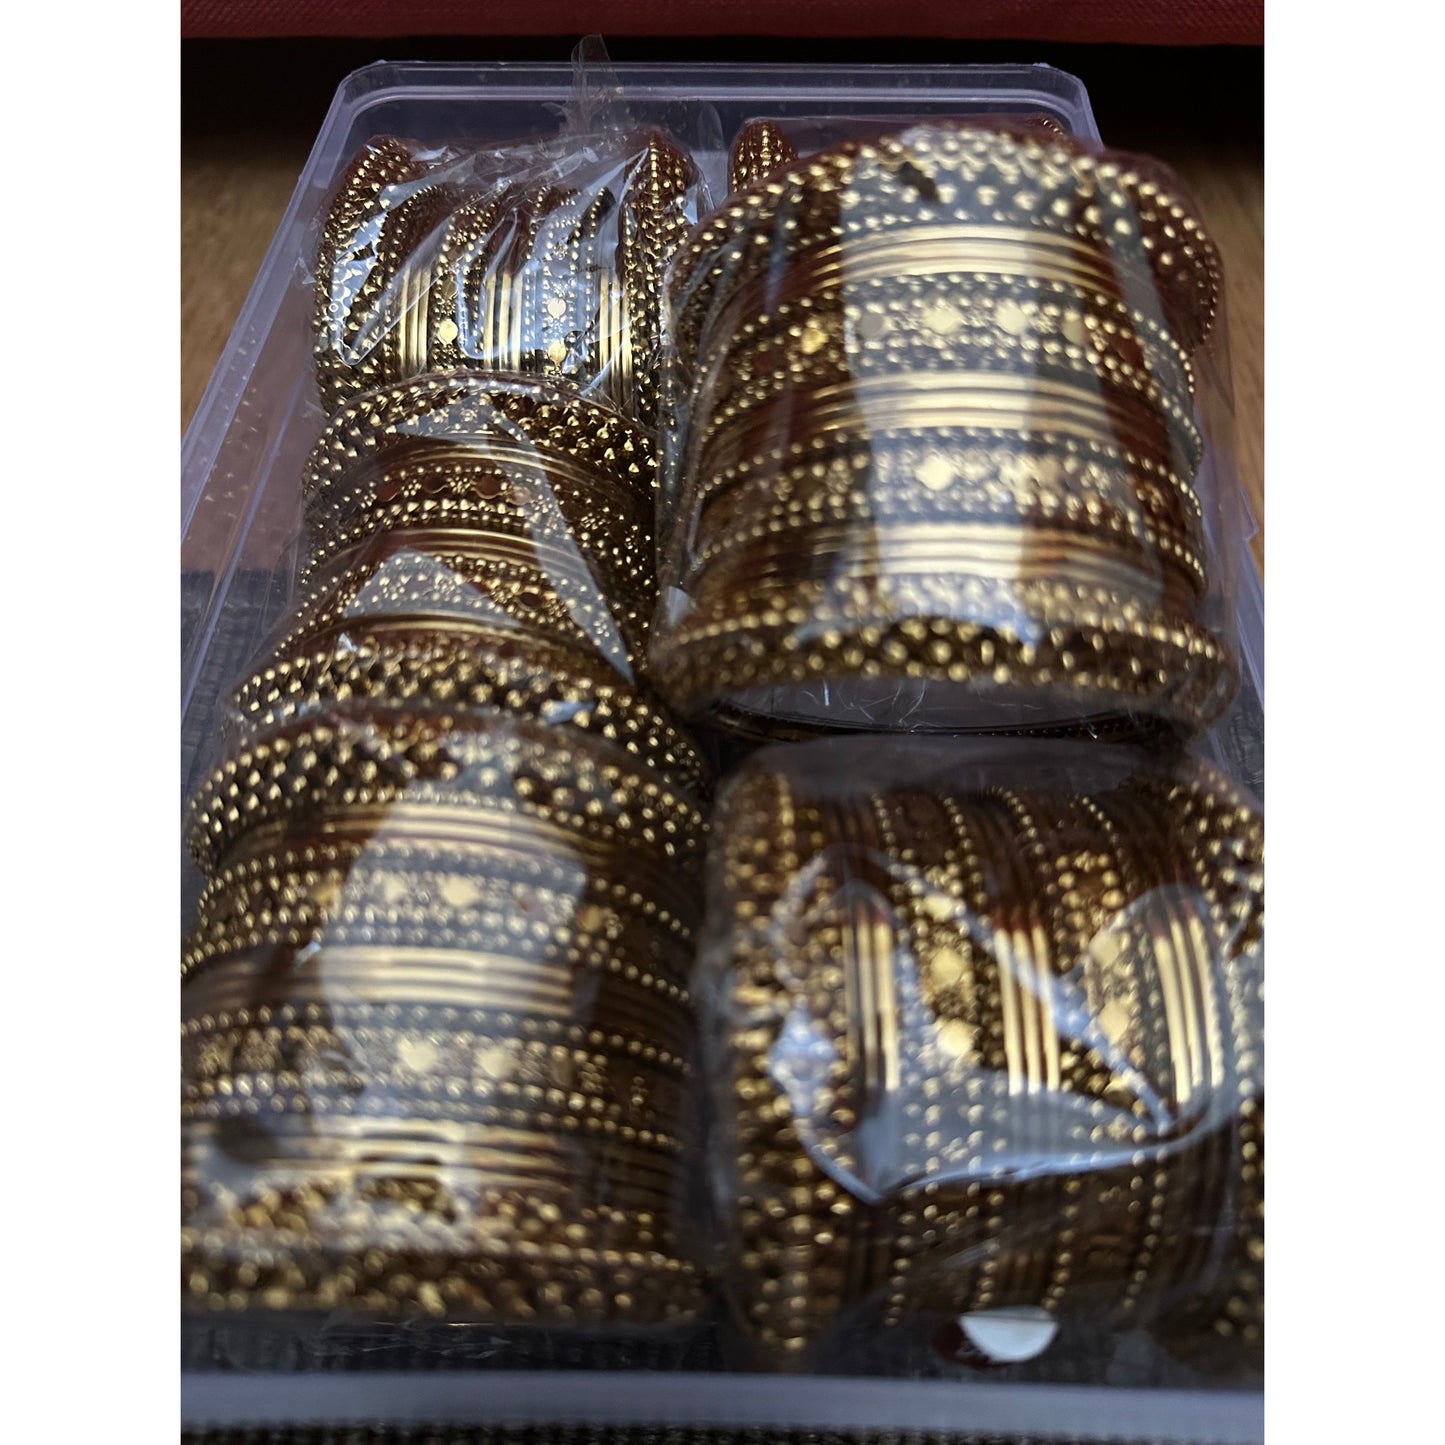 Indian Bangles for Women